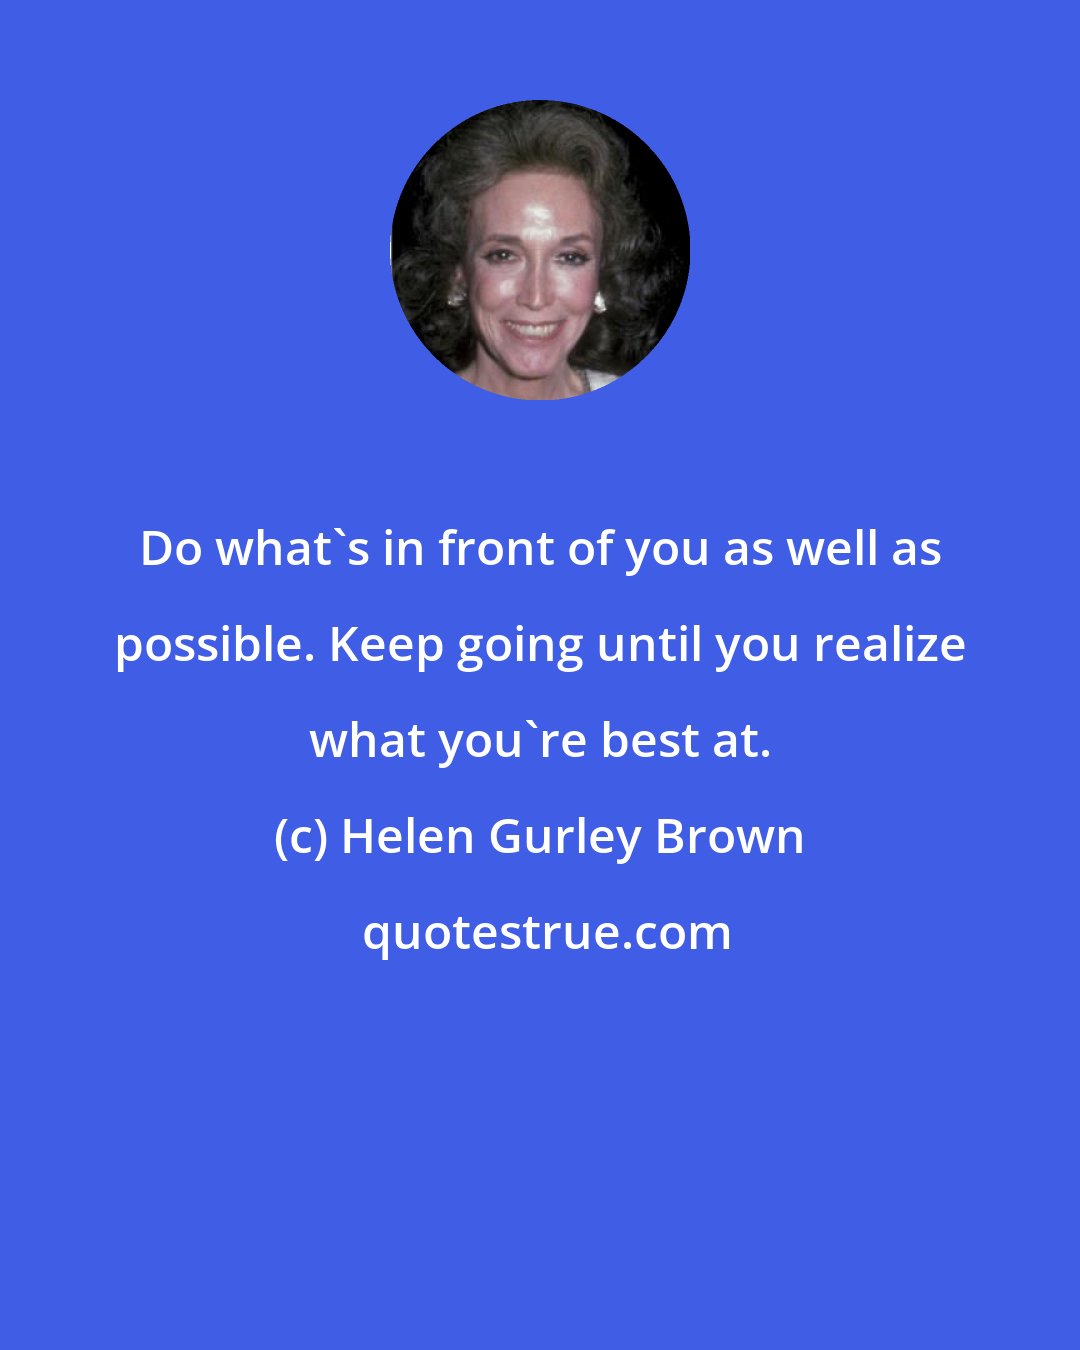 Helen Gurley Brown: Do what's in front of you as well as possible. Keep going until you realize what you're best at.